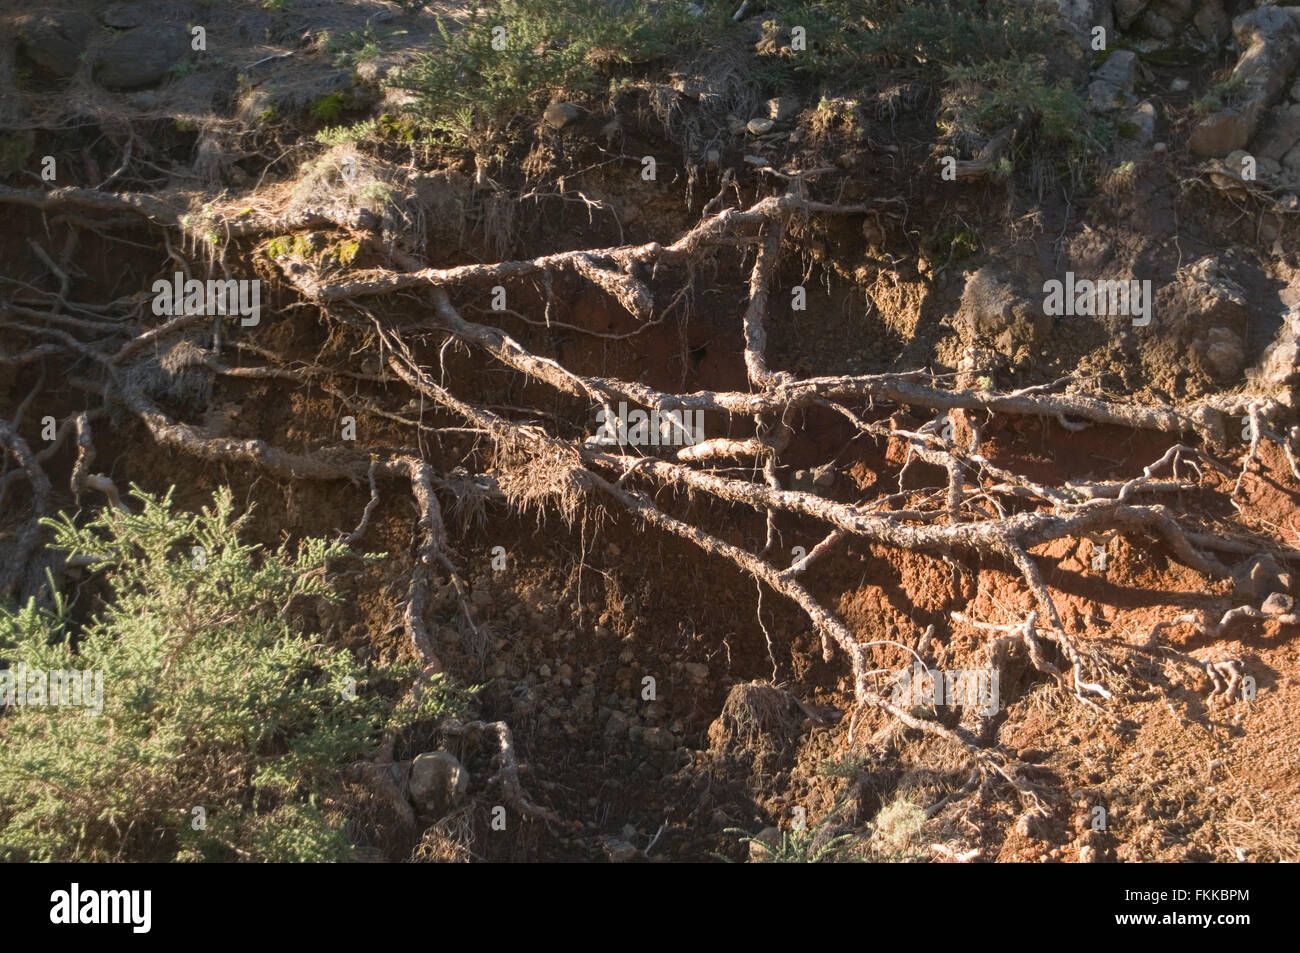 soil erosion eroded land exposed roots roots system washed away water wind systems plant plants tree trees Stock Photo